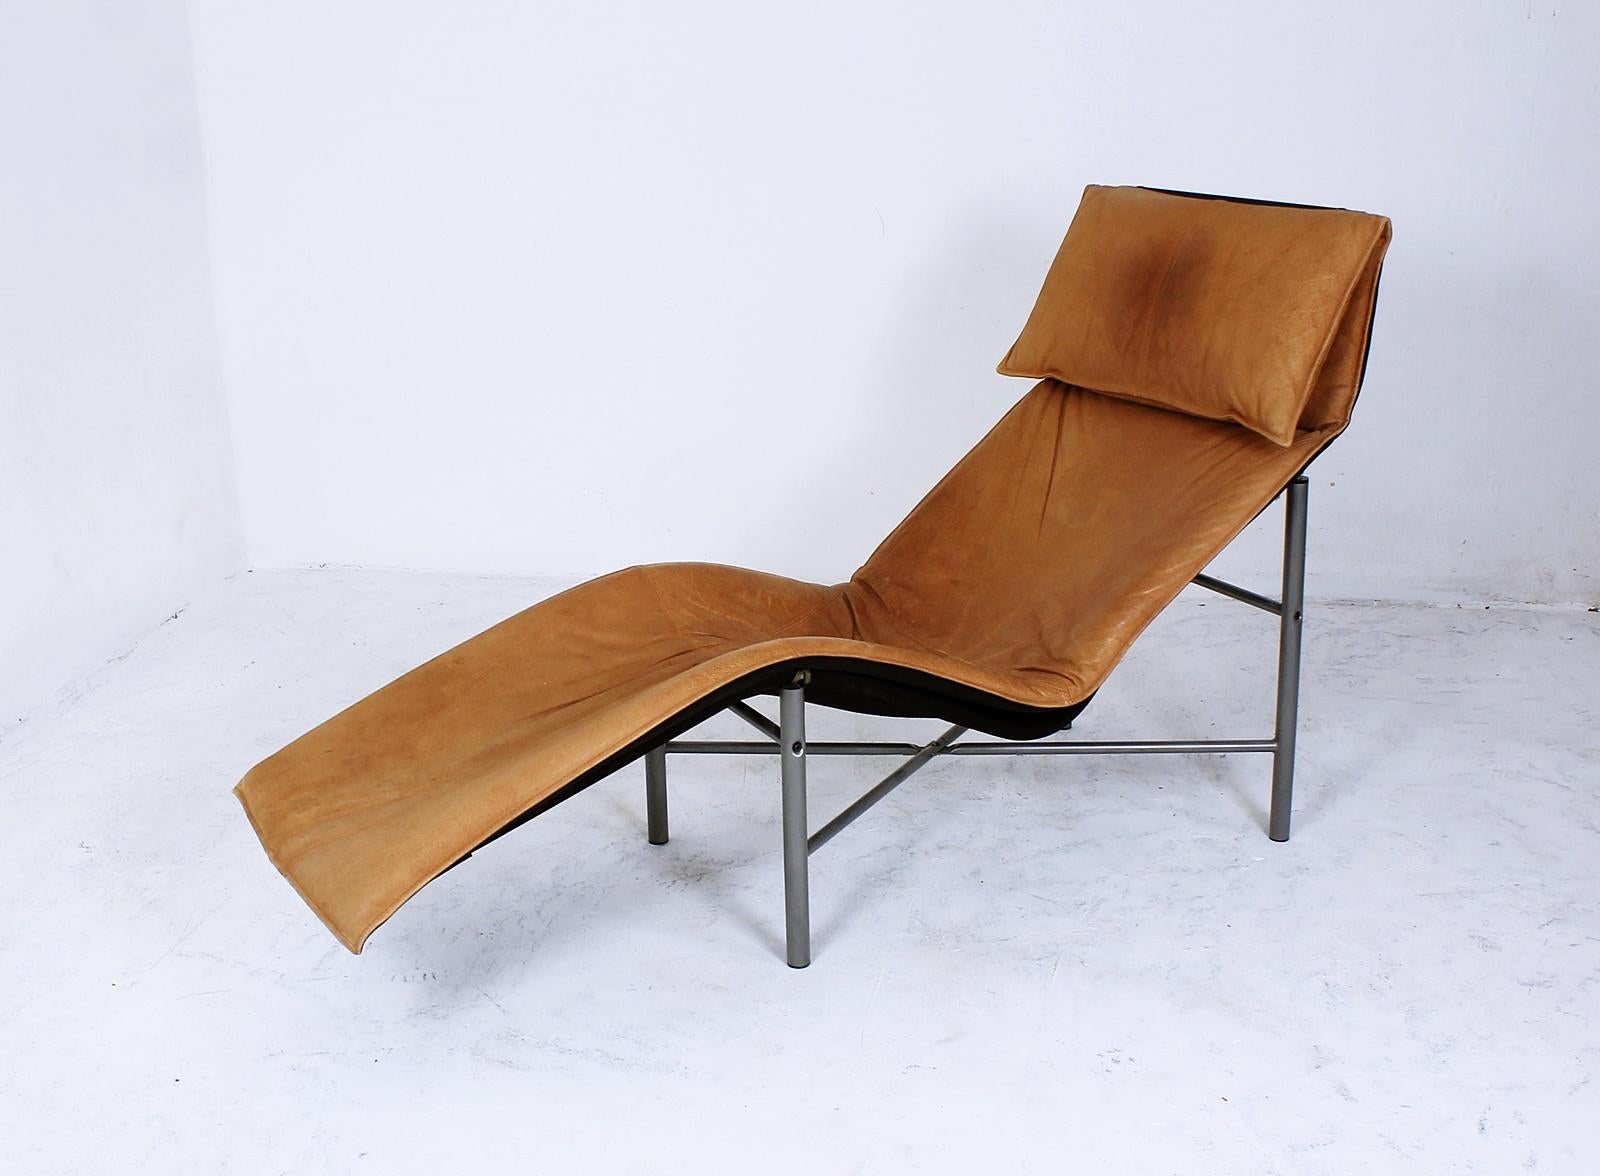 The Skye lounger was designed by Swedish interior designer Tord Björklund for Ikea. This chair features a patinated light brown leather cushion on a black canvas supported by a silver painted tubular metal base.